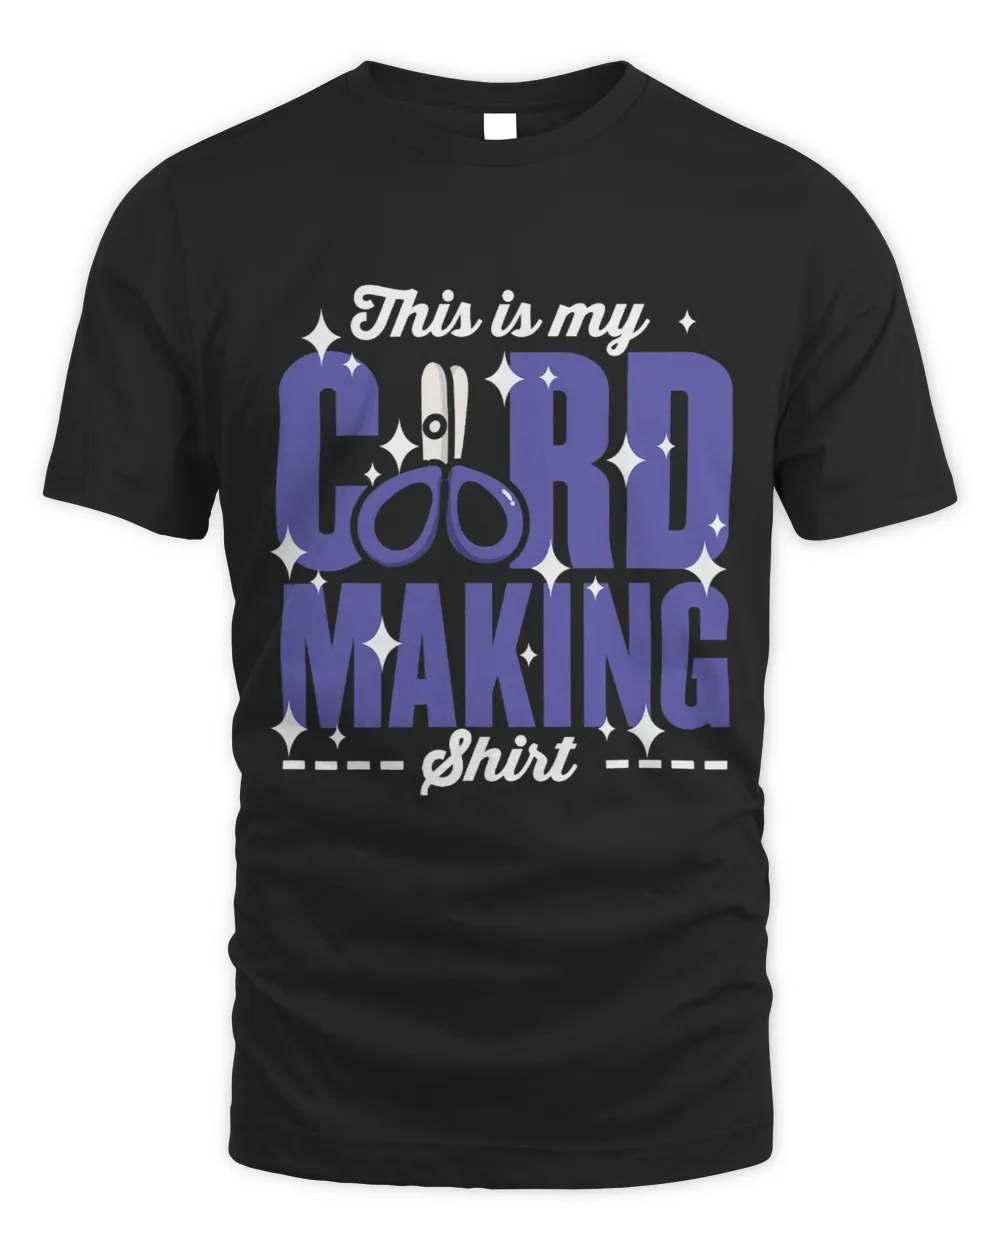 This is my card making shirt scrapbooking scrapbook